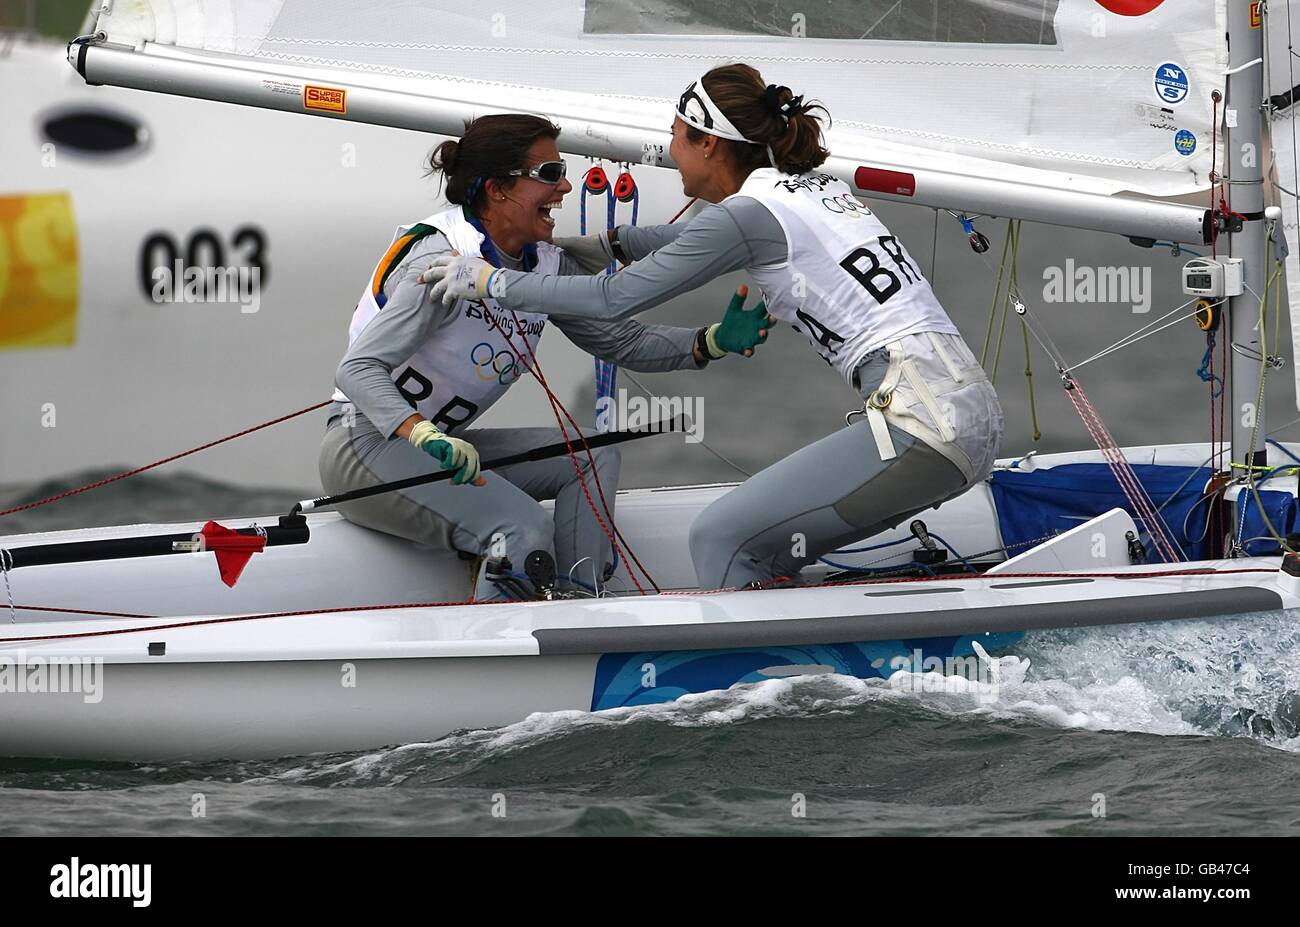 Brazil's Fernanda Oliveira and Isabel Swan celebrate after winning their final class race of the Women's 470 class during the 2008 Beijing Olympic Games' Sailing Centre in Qingdao, China. Stock Photo